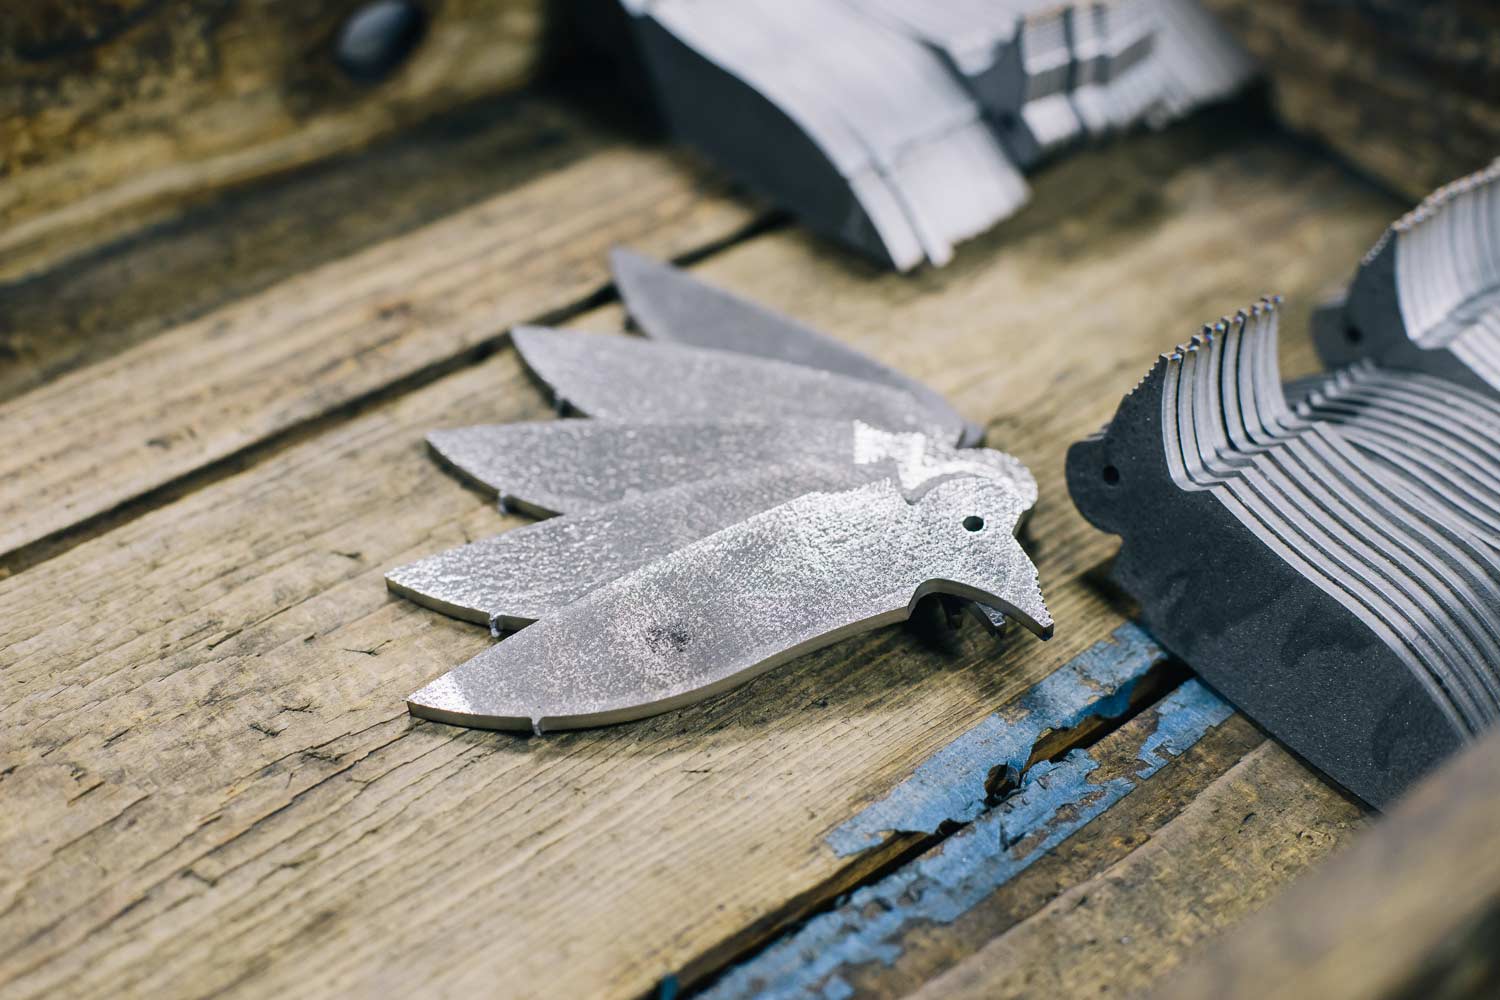 A deep dive into how knife blades are made